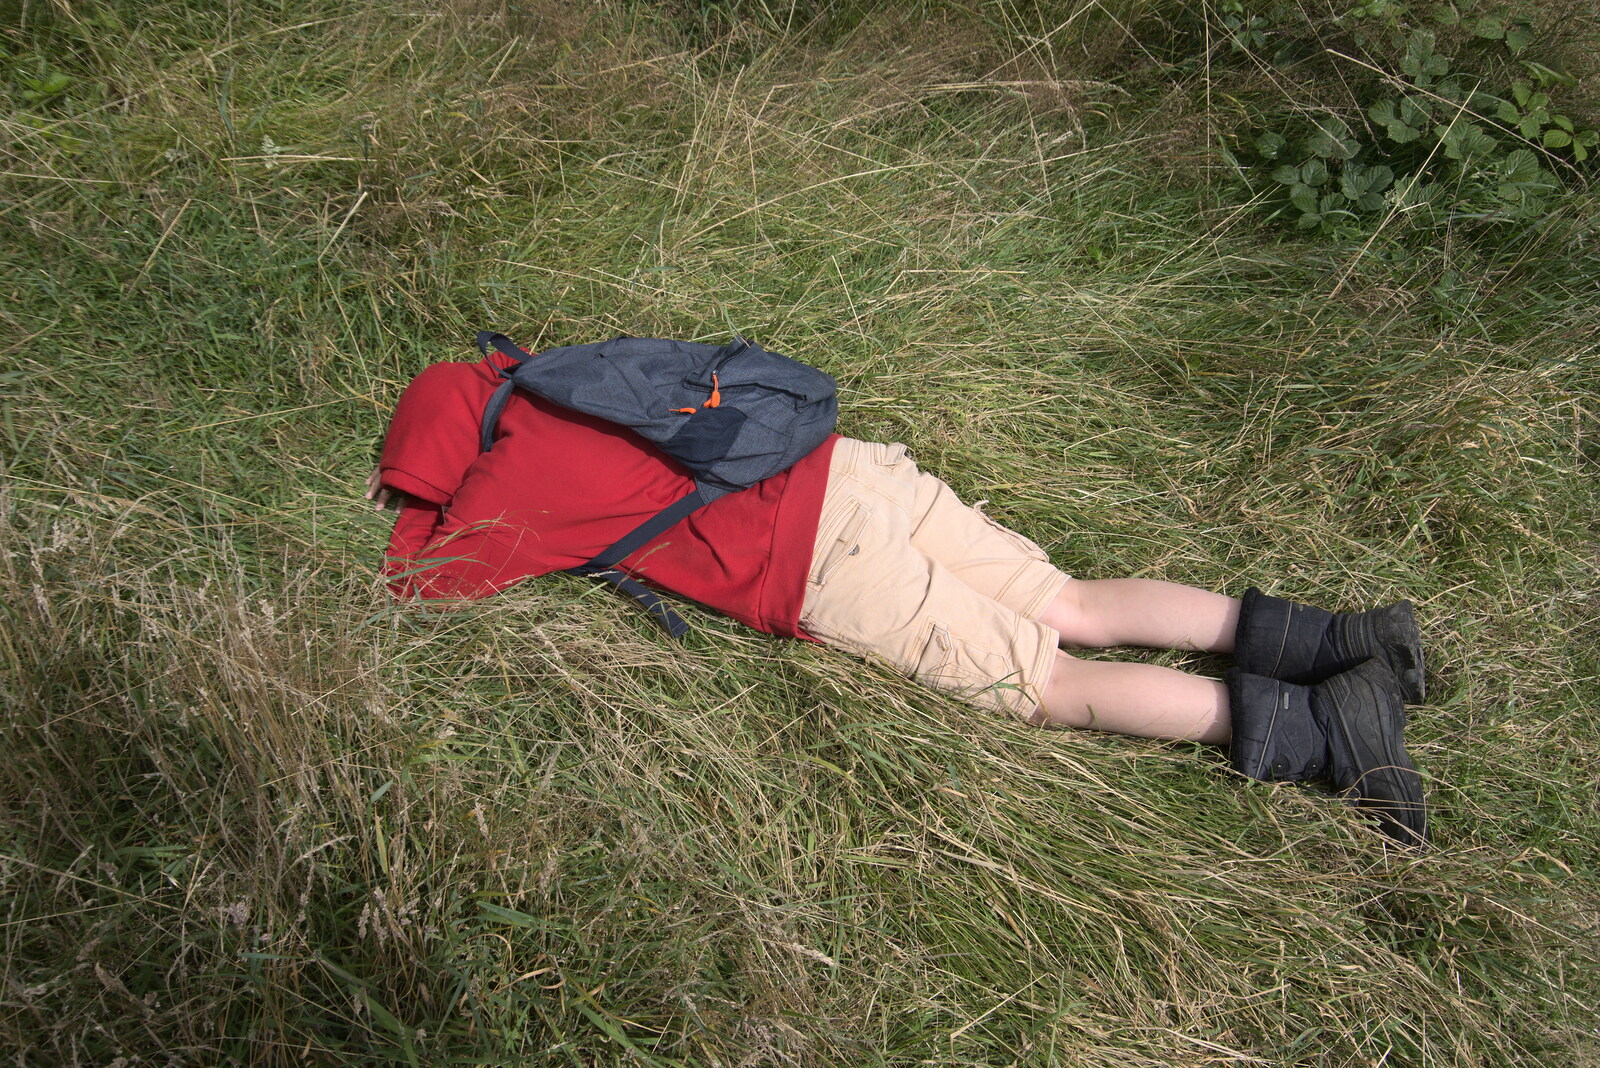 Fred has a rest in the grass from Walks Around Benbulben and Carrowmore, County Sligo, Ireland - 13th August 2021